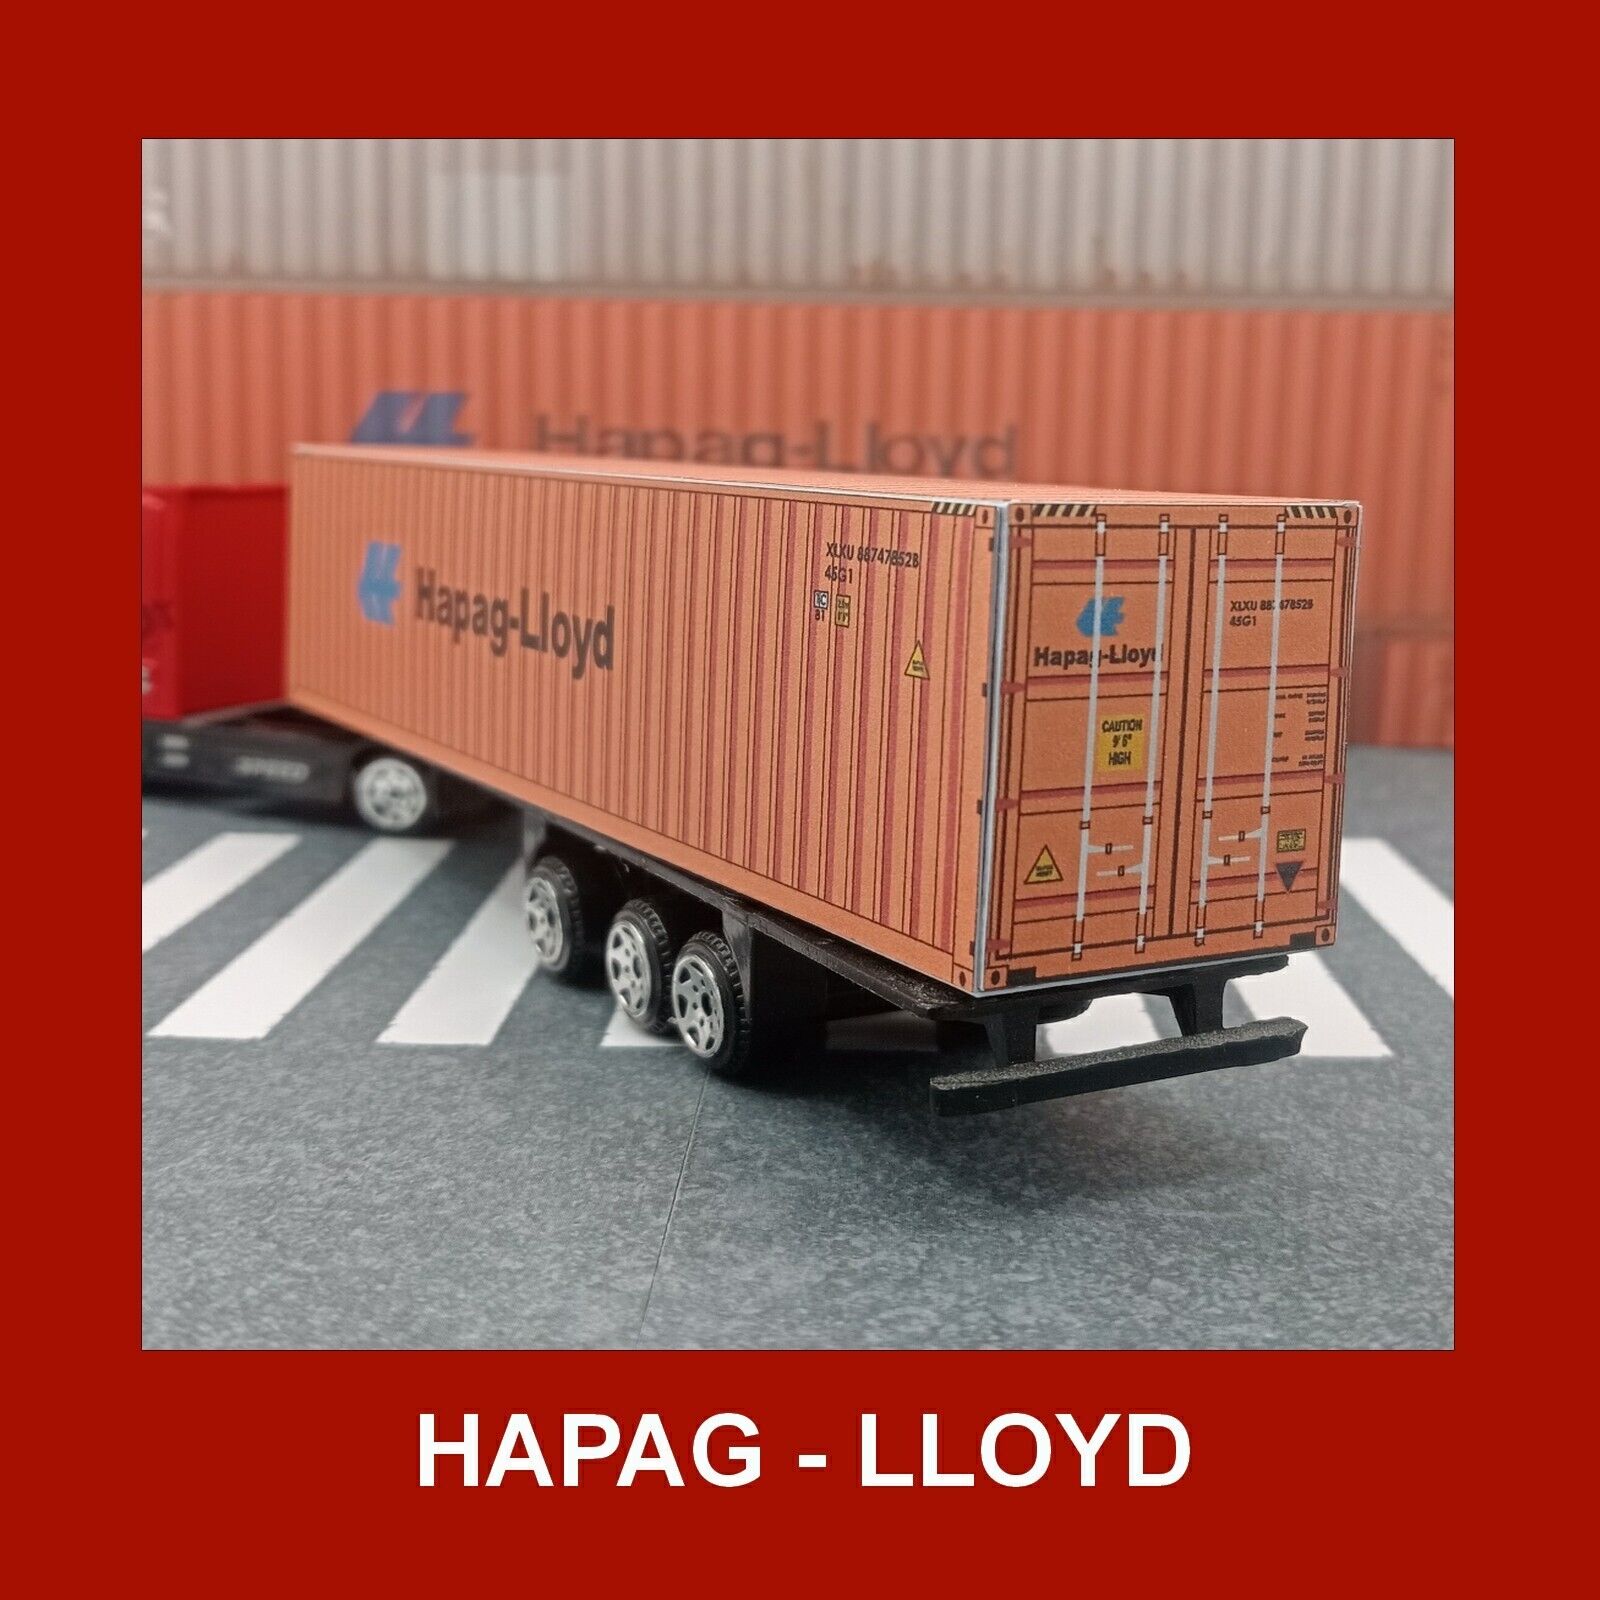 HO Hapag-Lloyd Freight Shipping Containers x 4 40ft Gauge 1:87